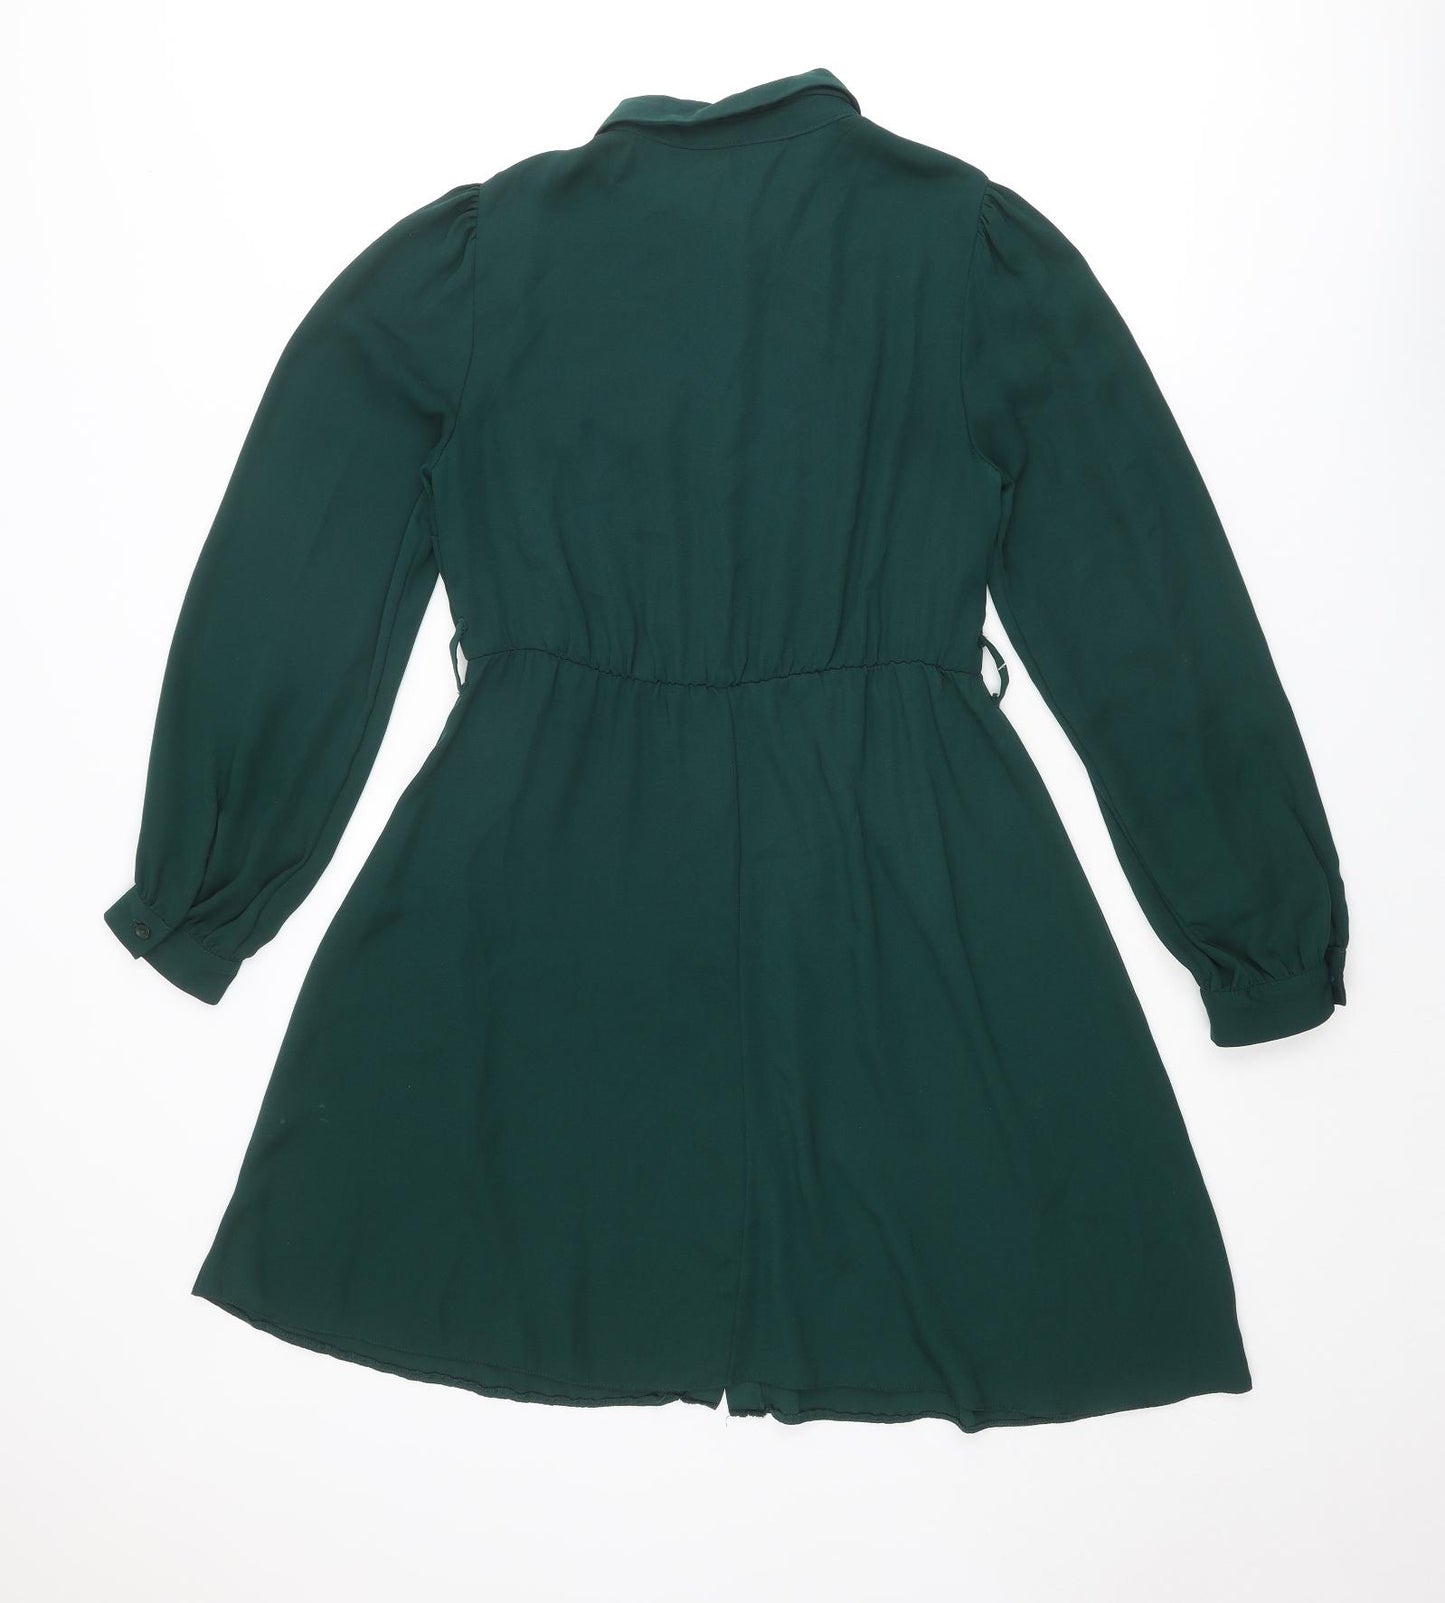 New Look Womens Green Polyester Shirt Dress Size 10 Collared Button